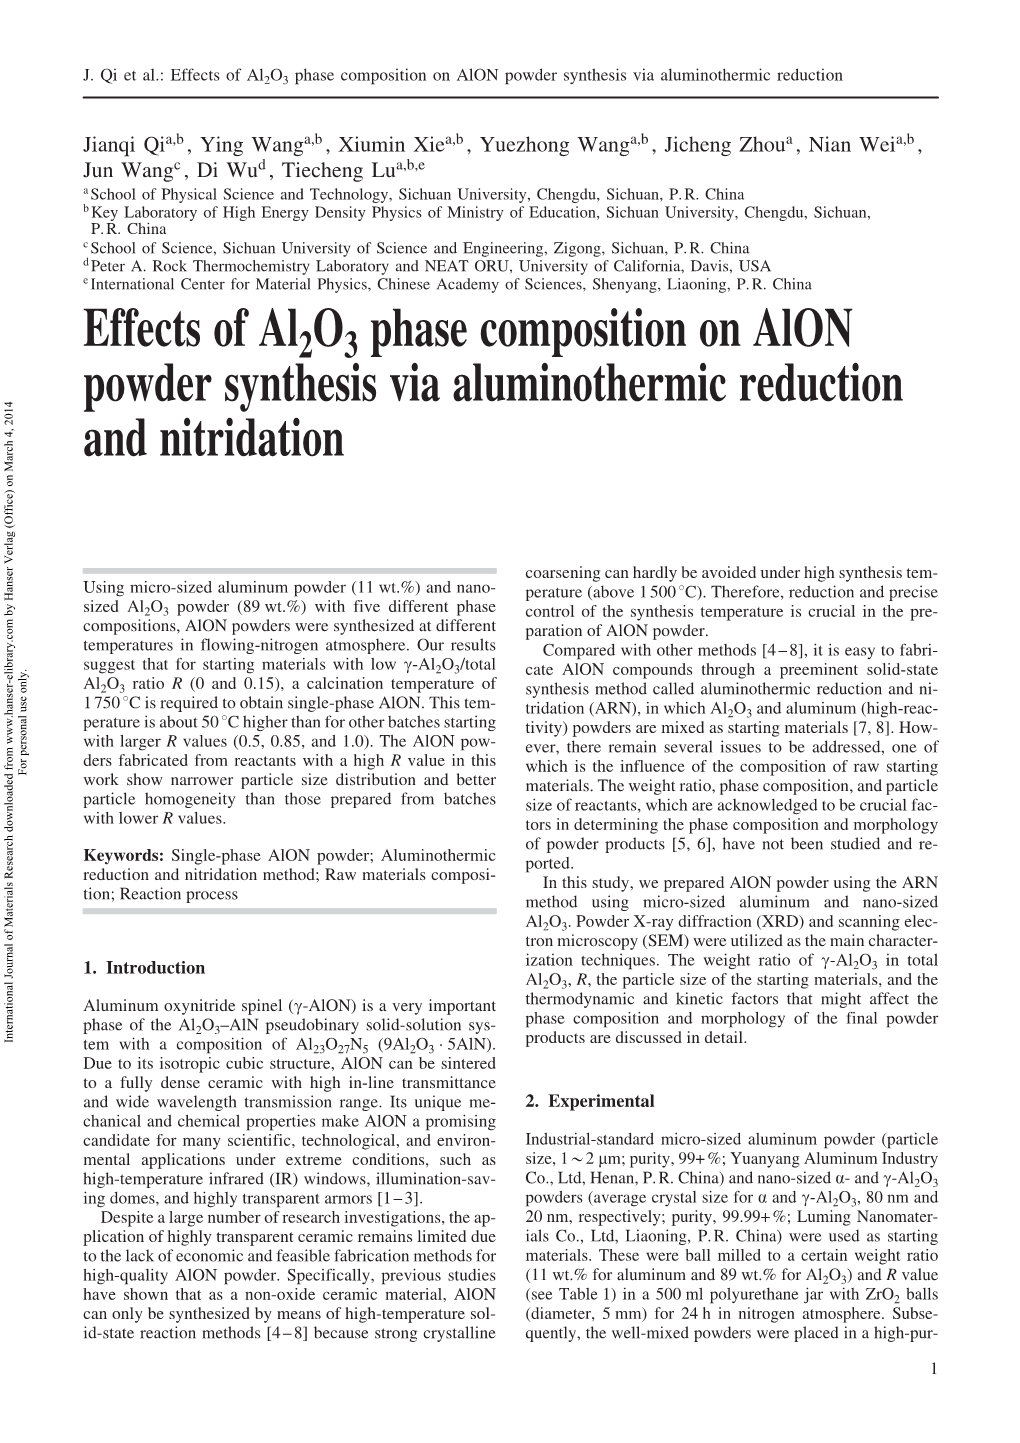 Effects of Al 2 O 3 Phase Composition on Alon Powder Synthesis Via